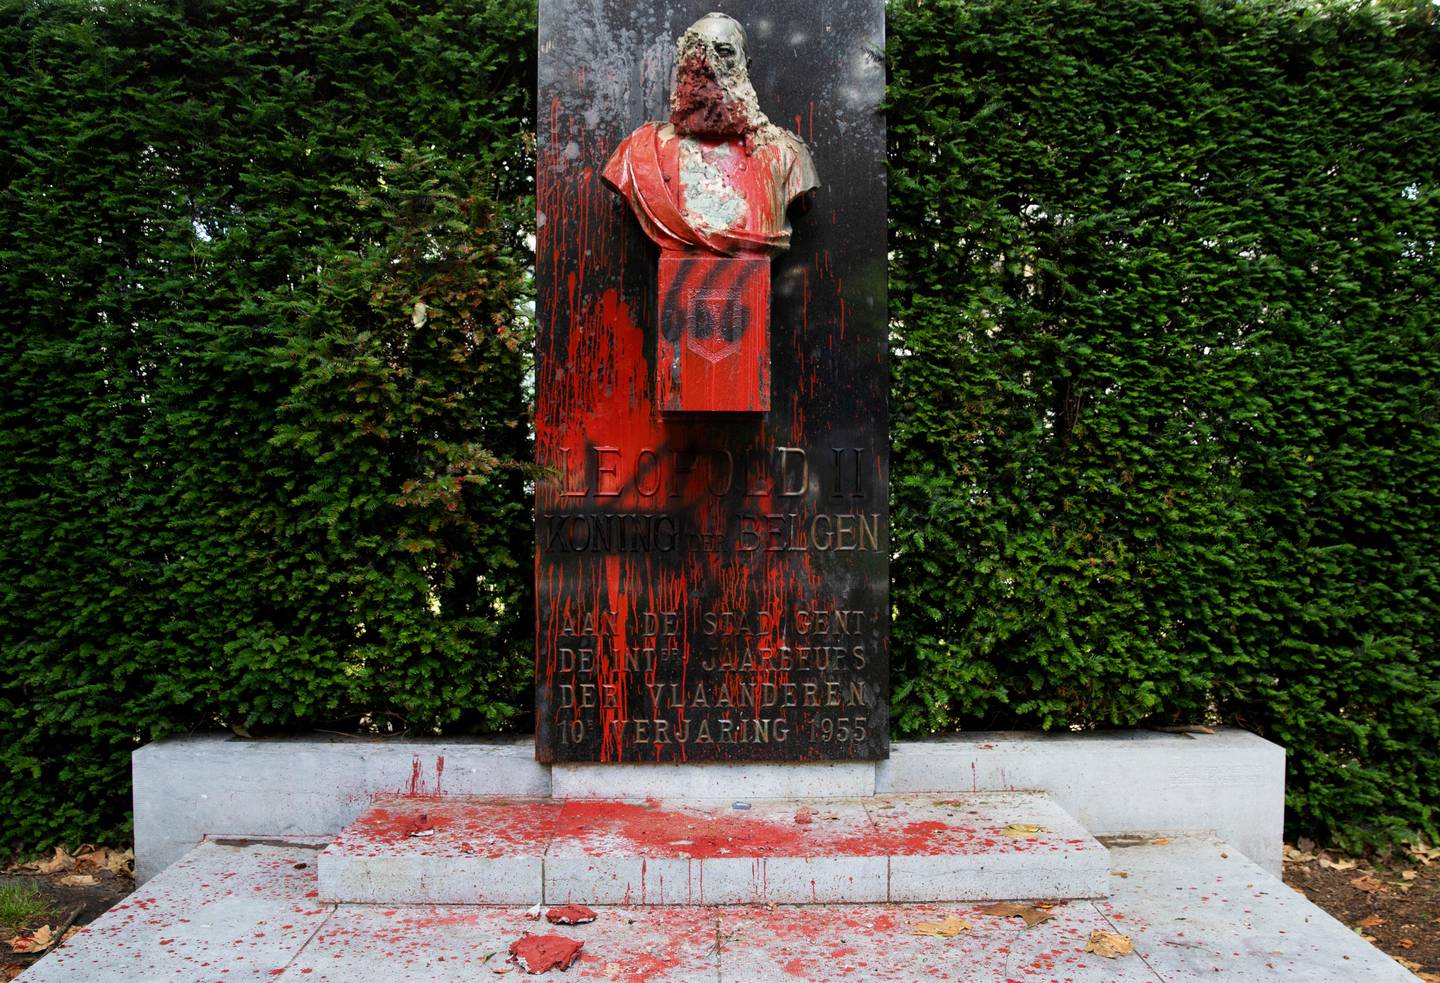 A bust of Belgium's King Leopold II, which has been damaged by red paint, graffiti and cement, at a park in Ghent, Belgium on Friday, June 19, 2020. Protests sweeping the world after George Floyd's death in the U.S. have added fuel to a movement to confront Europe's role in the slave trade and its colonial past. Leopold II is increasingly seen as a stain on the nation where he reigned from 1865 to 1909 with some demonstrators wanting him removed from public view. (AP Photo/Virginia Mayo)